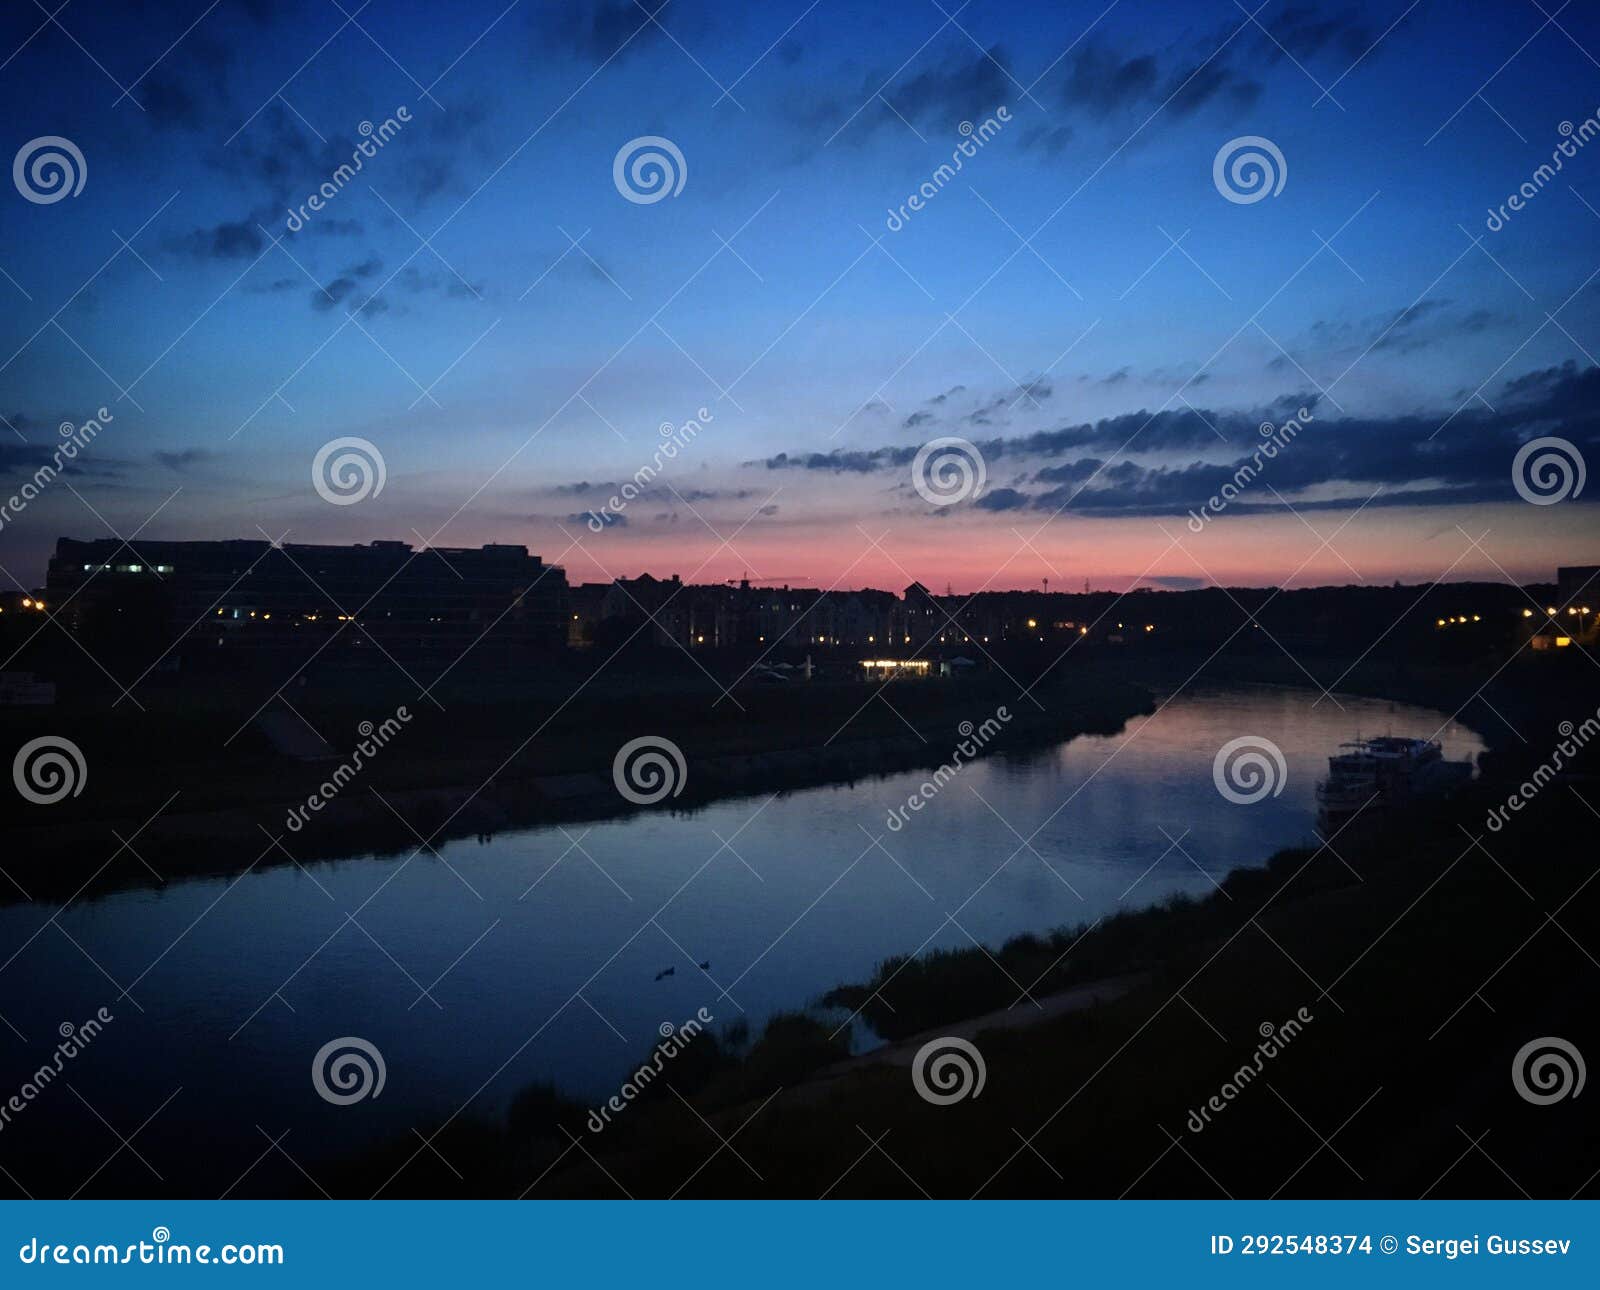 sunset over the warta river in pozna?, poland, june 2019